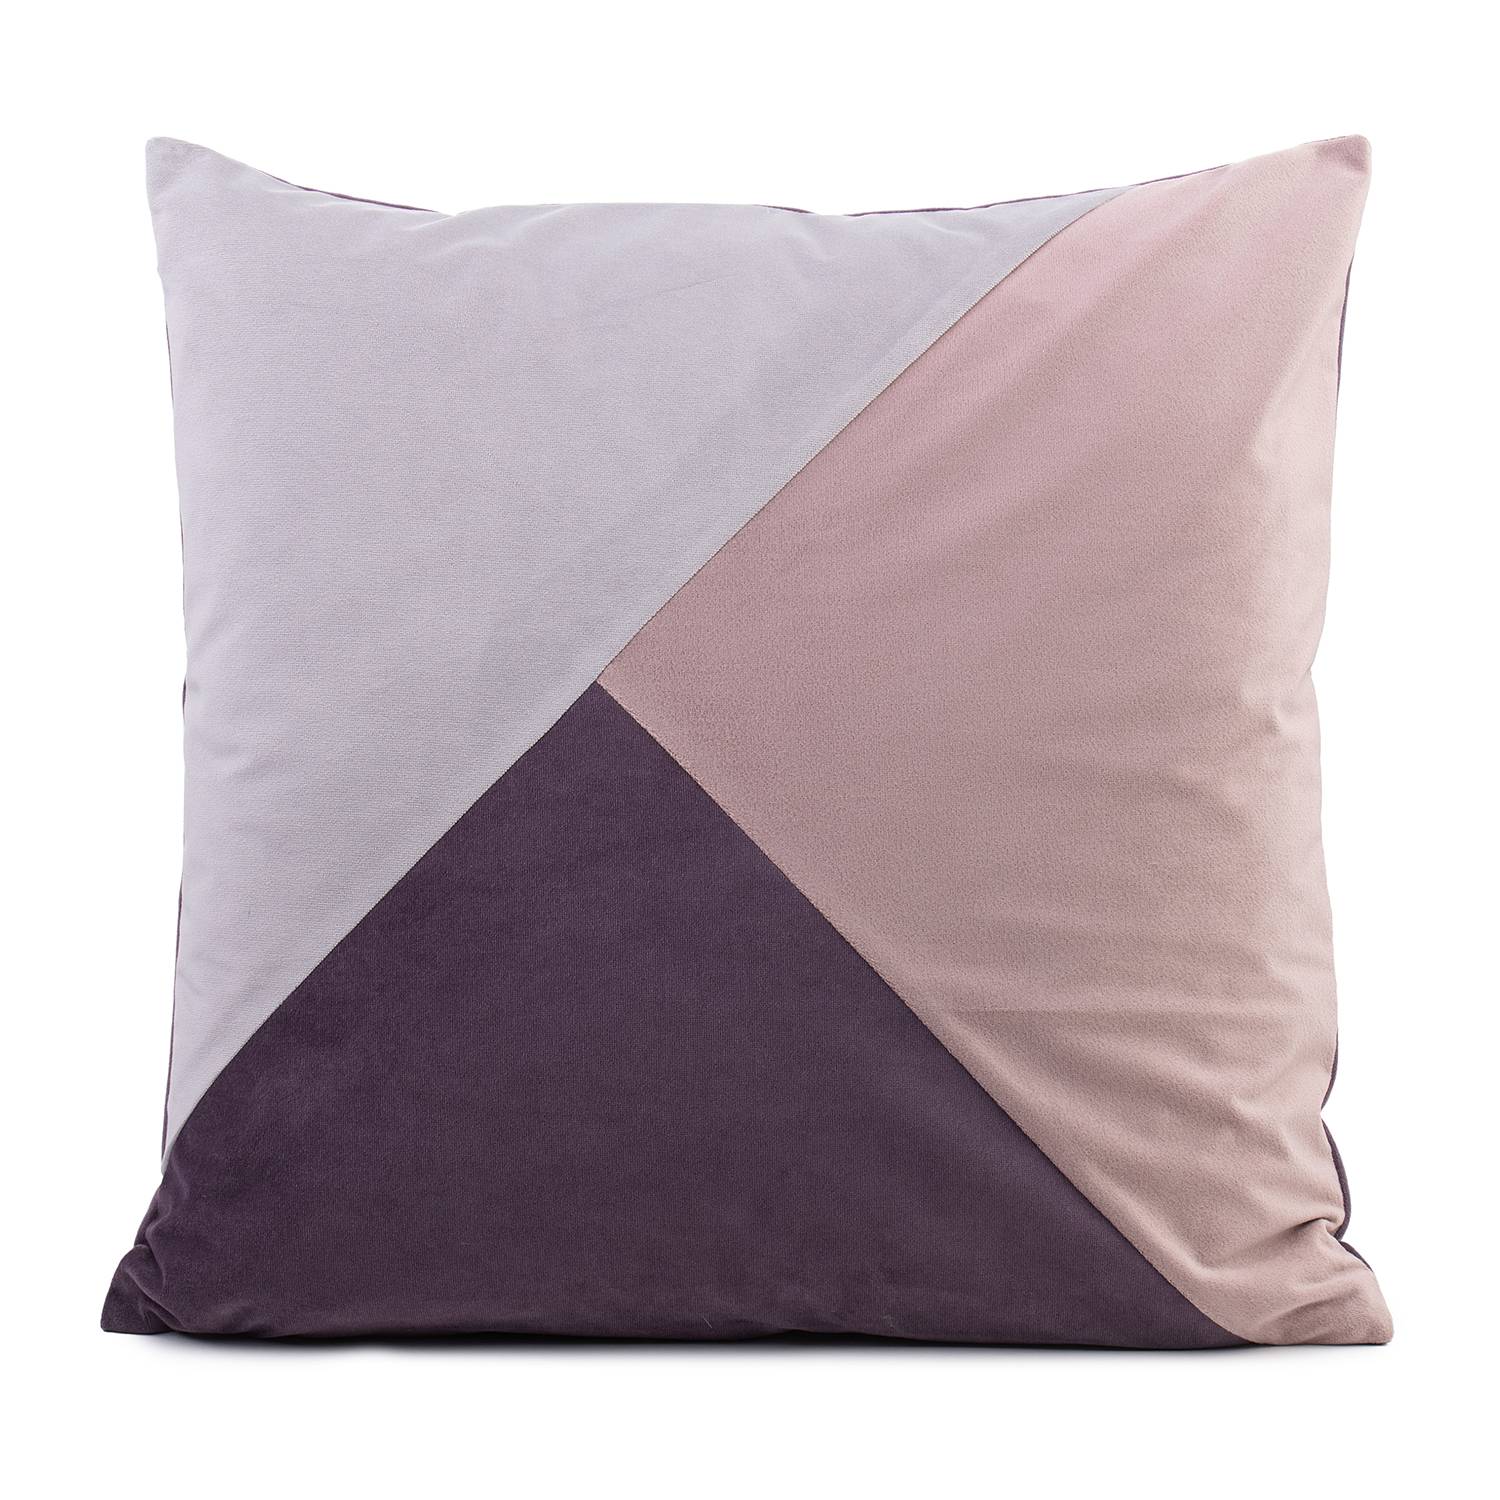 Image of Housse de coussin Peppino 000000001000243543